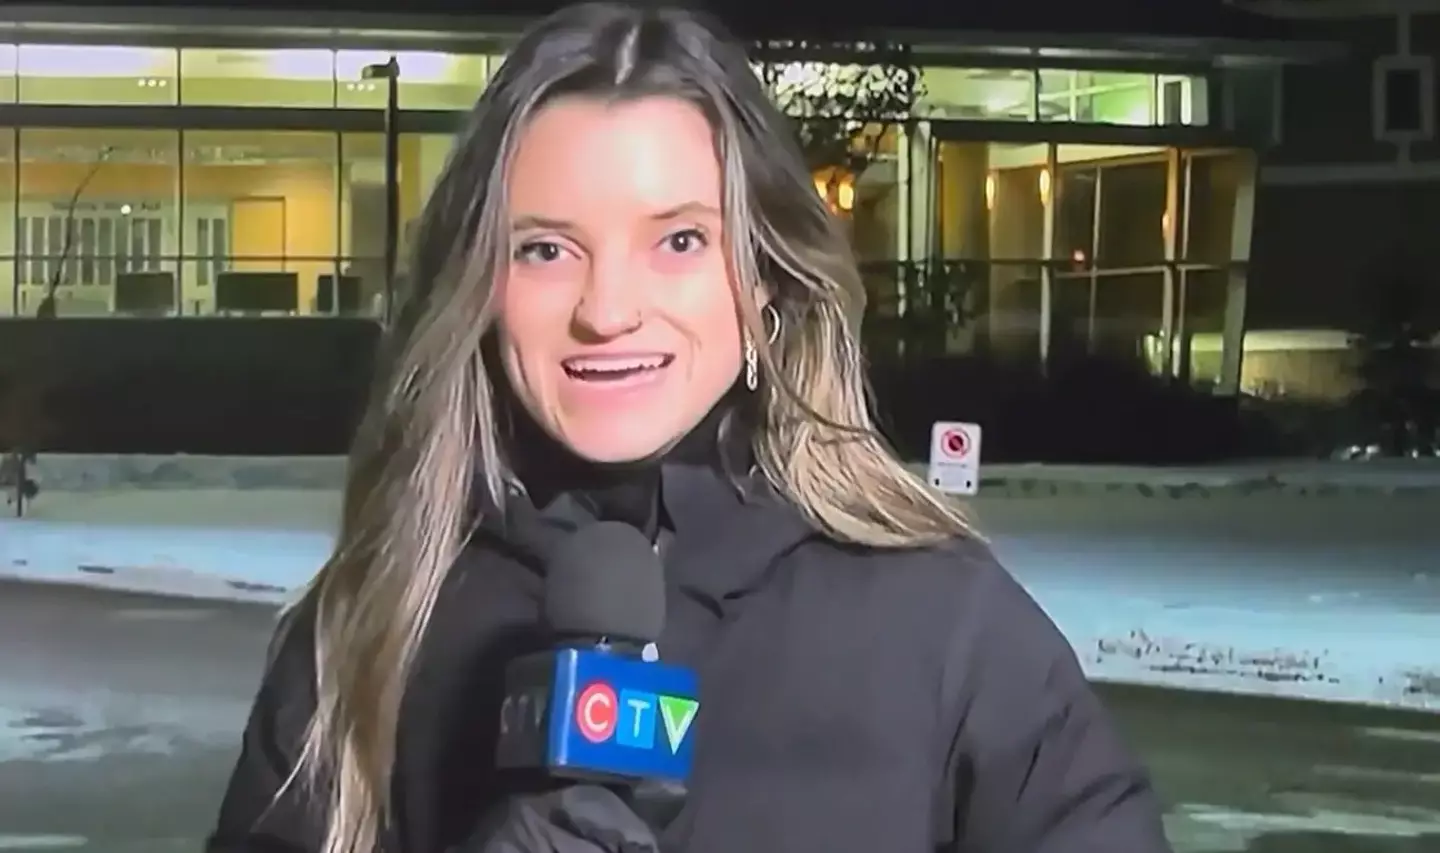 Reporter Jessica Robb began to feel unwell during the live broadcast.